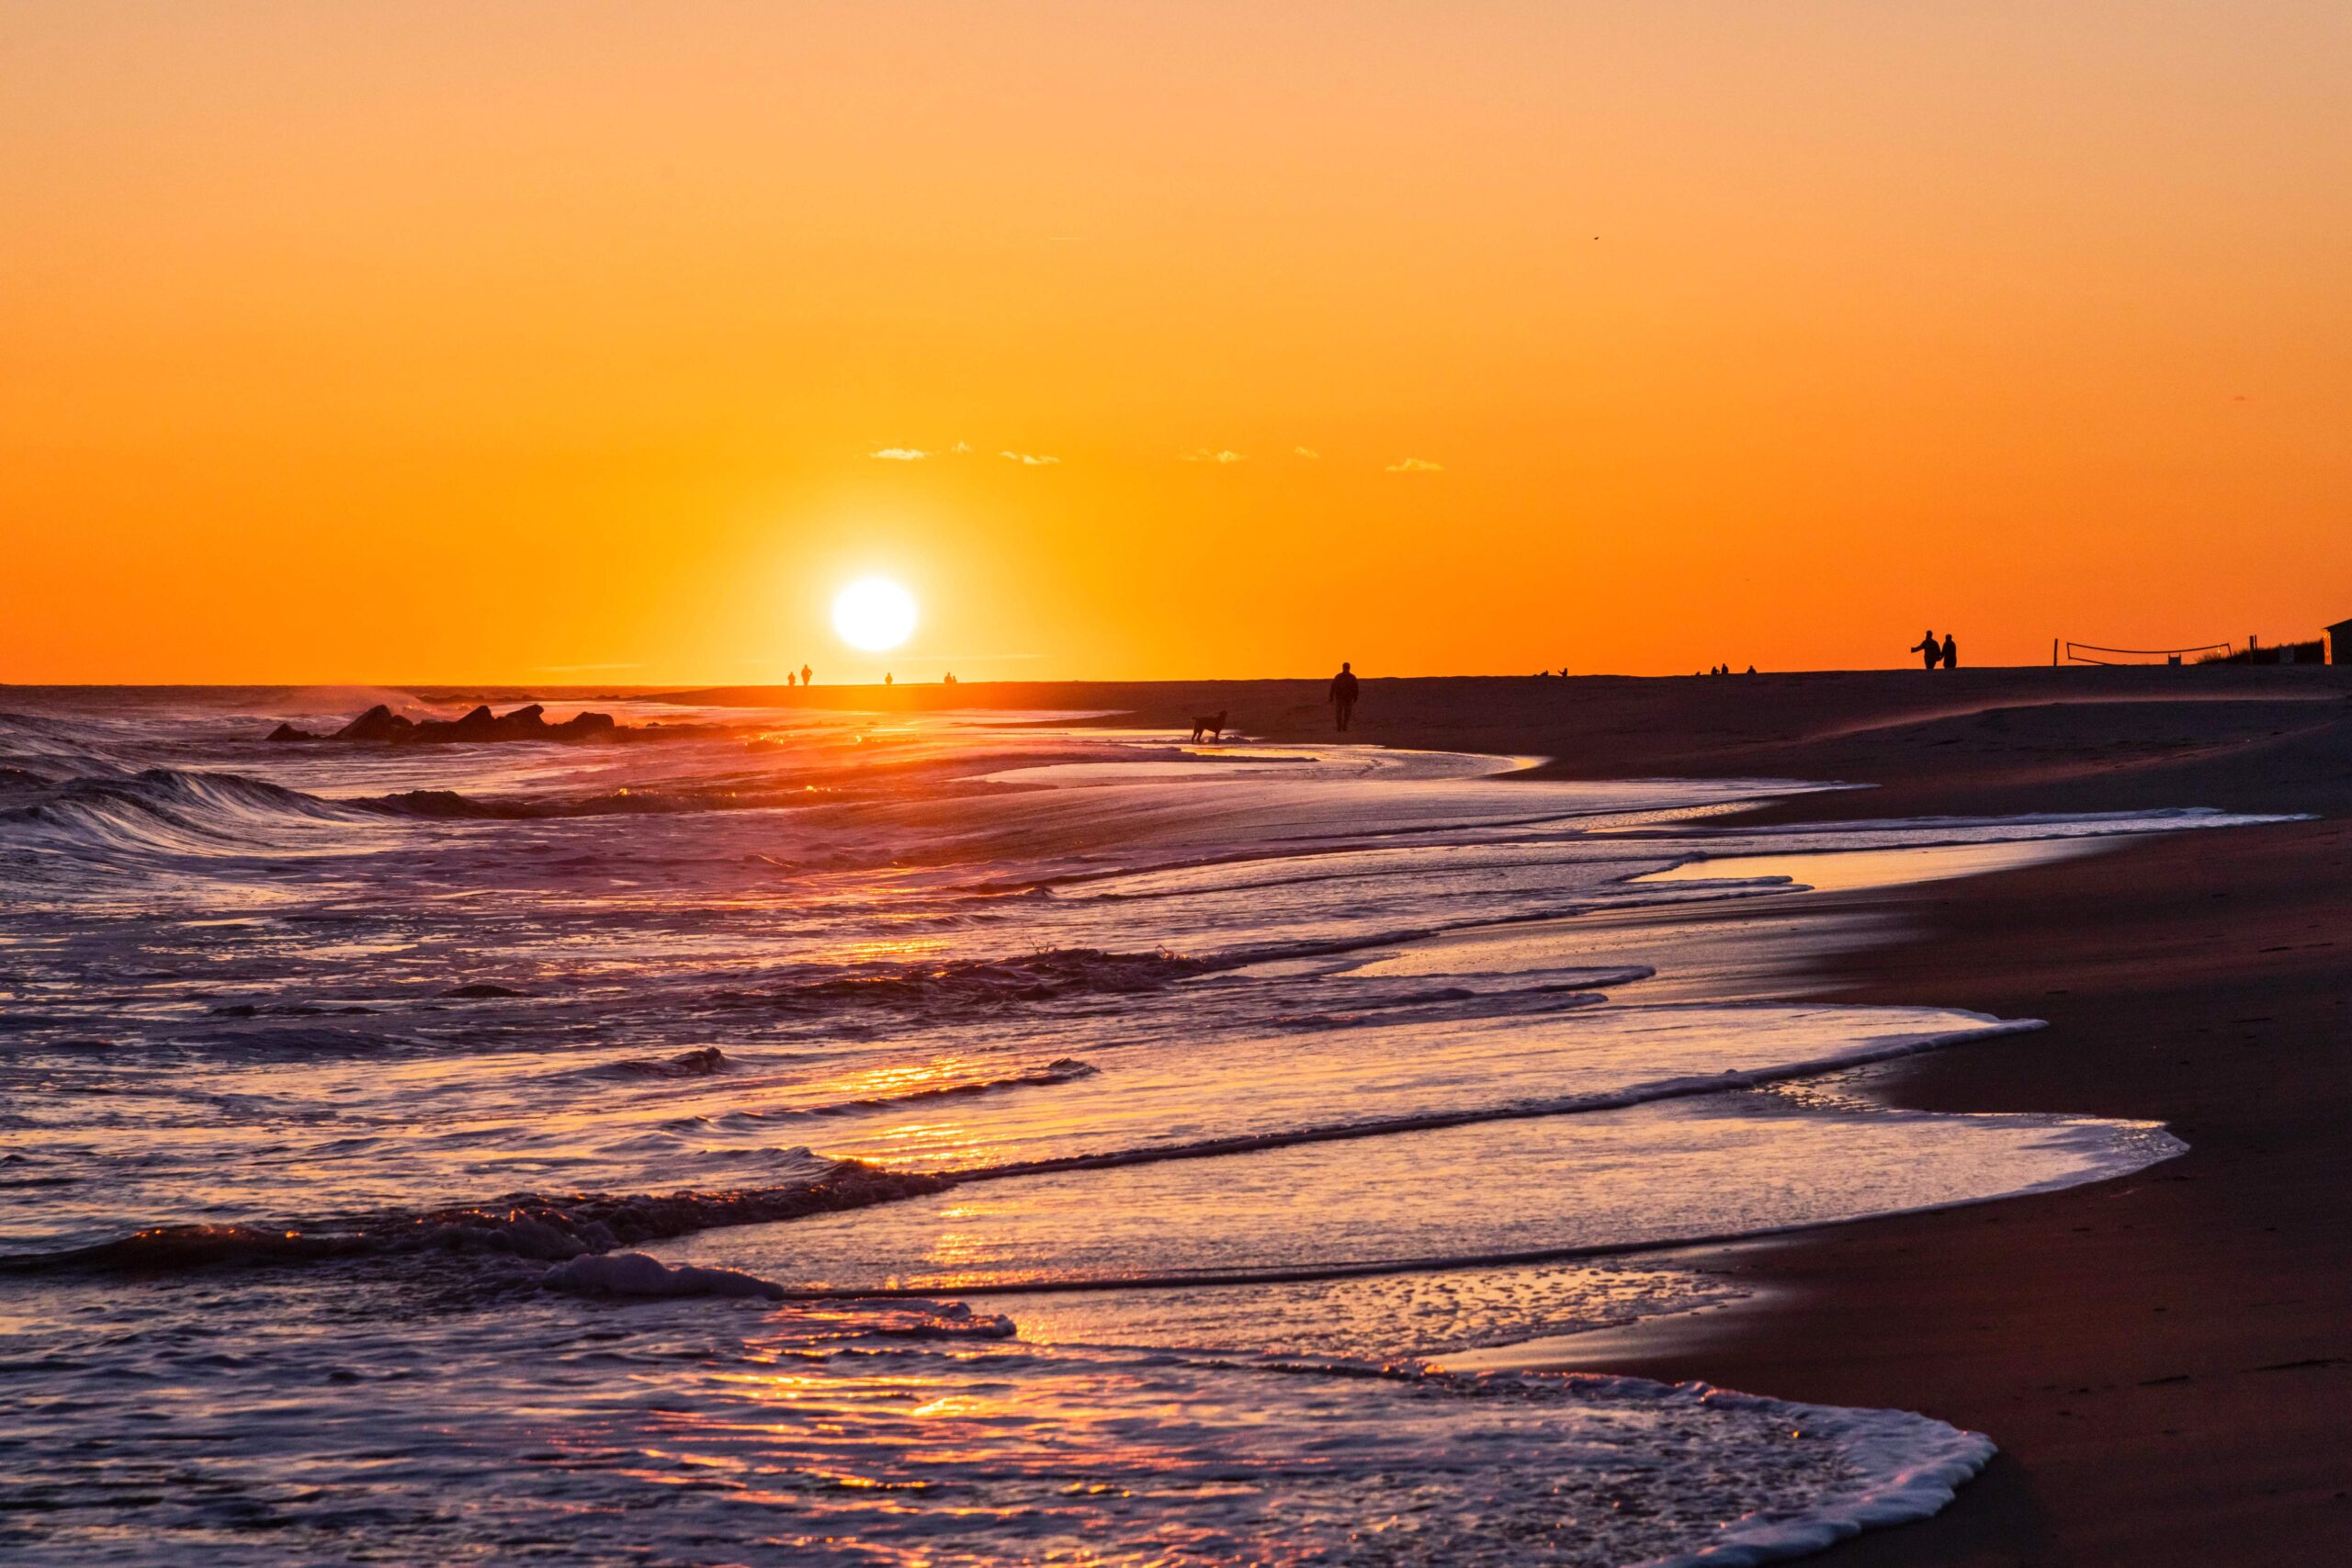 Waves rushing into the shoreline while people walk on the beach in the distance at sunset with a clear orange sky